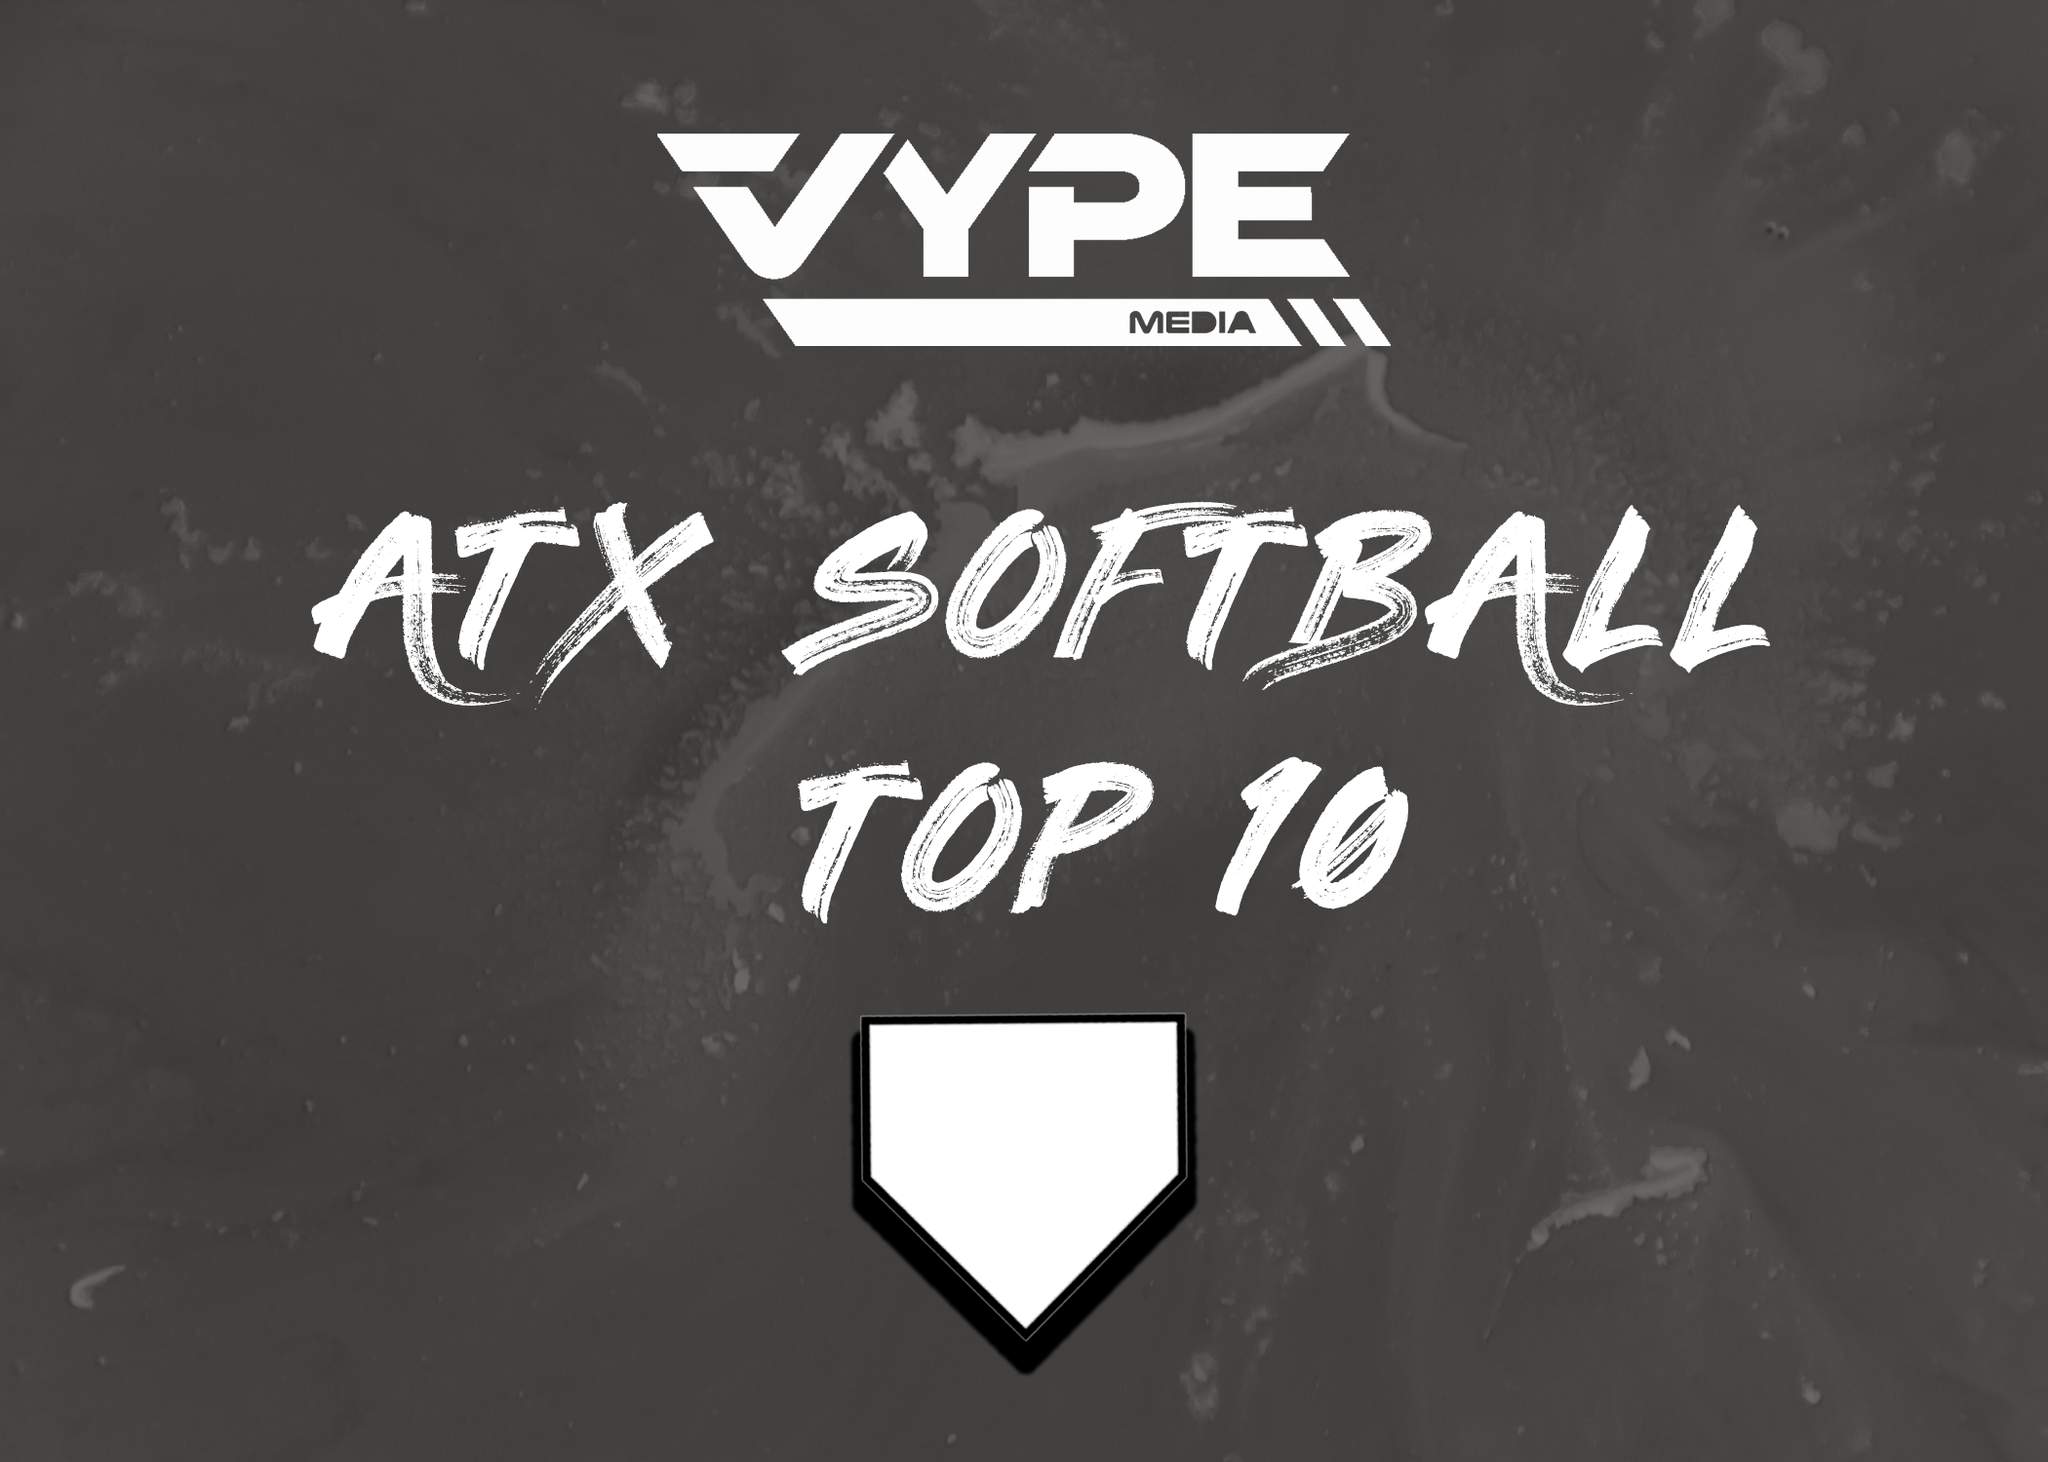 VYPE Austin Softball Top 10 Rankings: Week of 03/15/2021 presented by Academy Sports + Outdoors